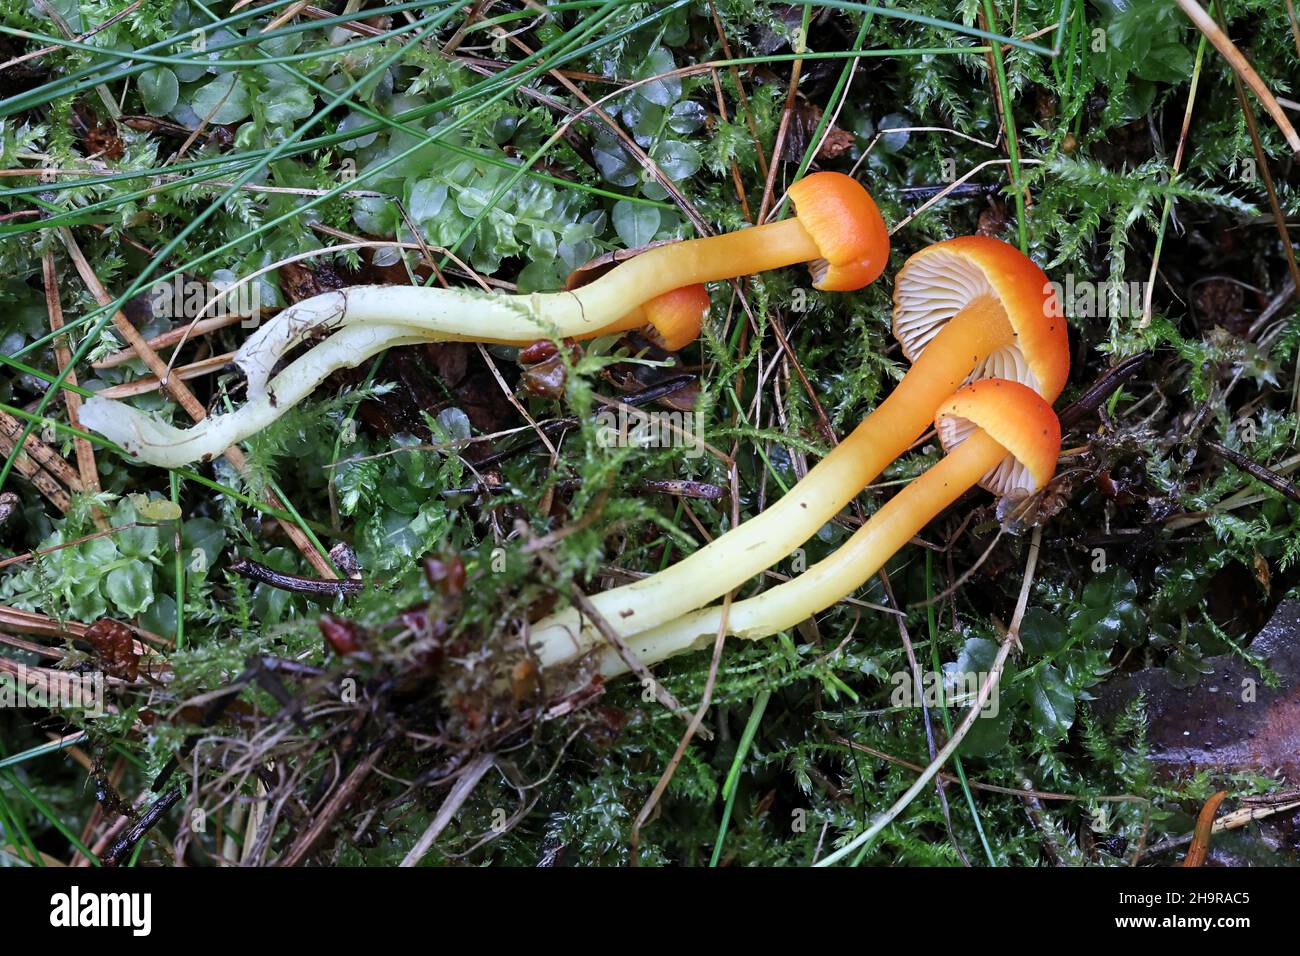 Hygrocybe insipida, known as spangle waxcap, wild mushroom from Finland Stock Photo